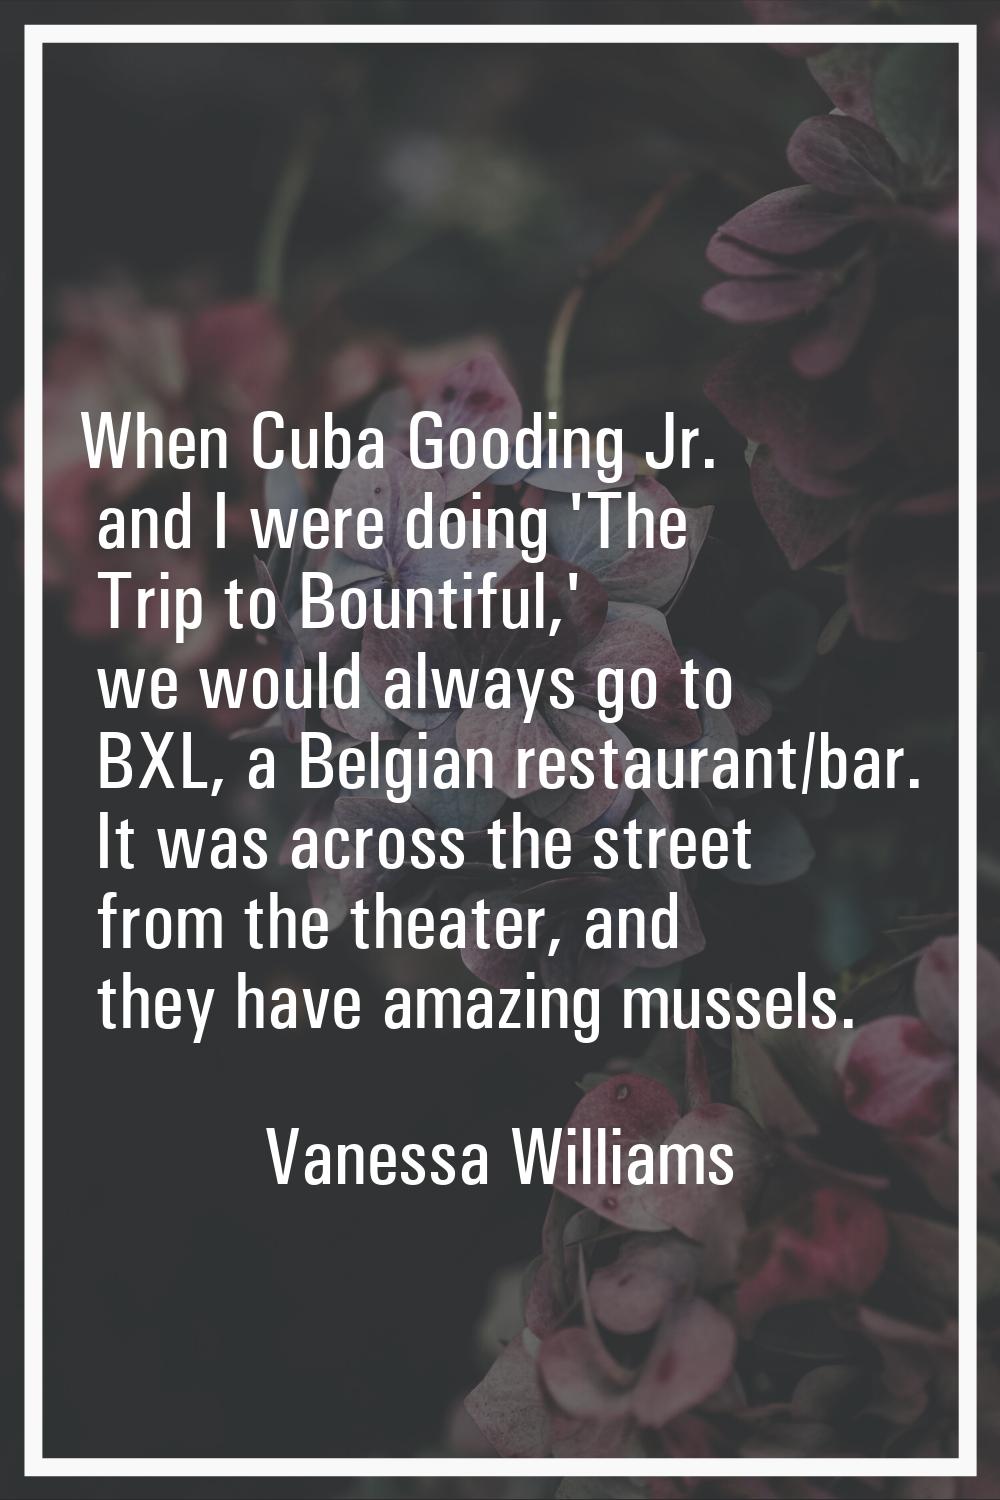 When Cuba Gooding Jr. and I were doing 'The Trip to Bountiful,' we would always go to BXL, a Belgia